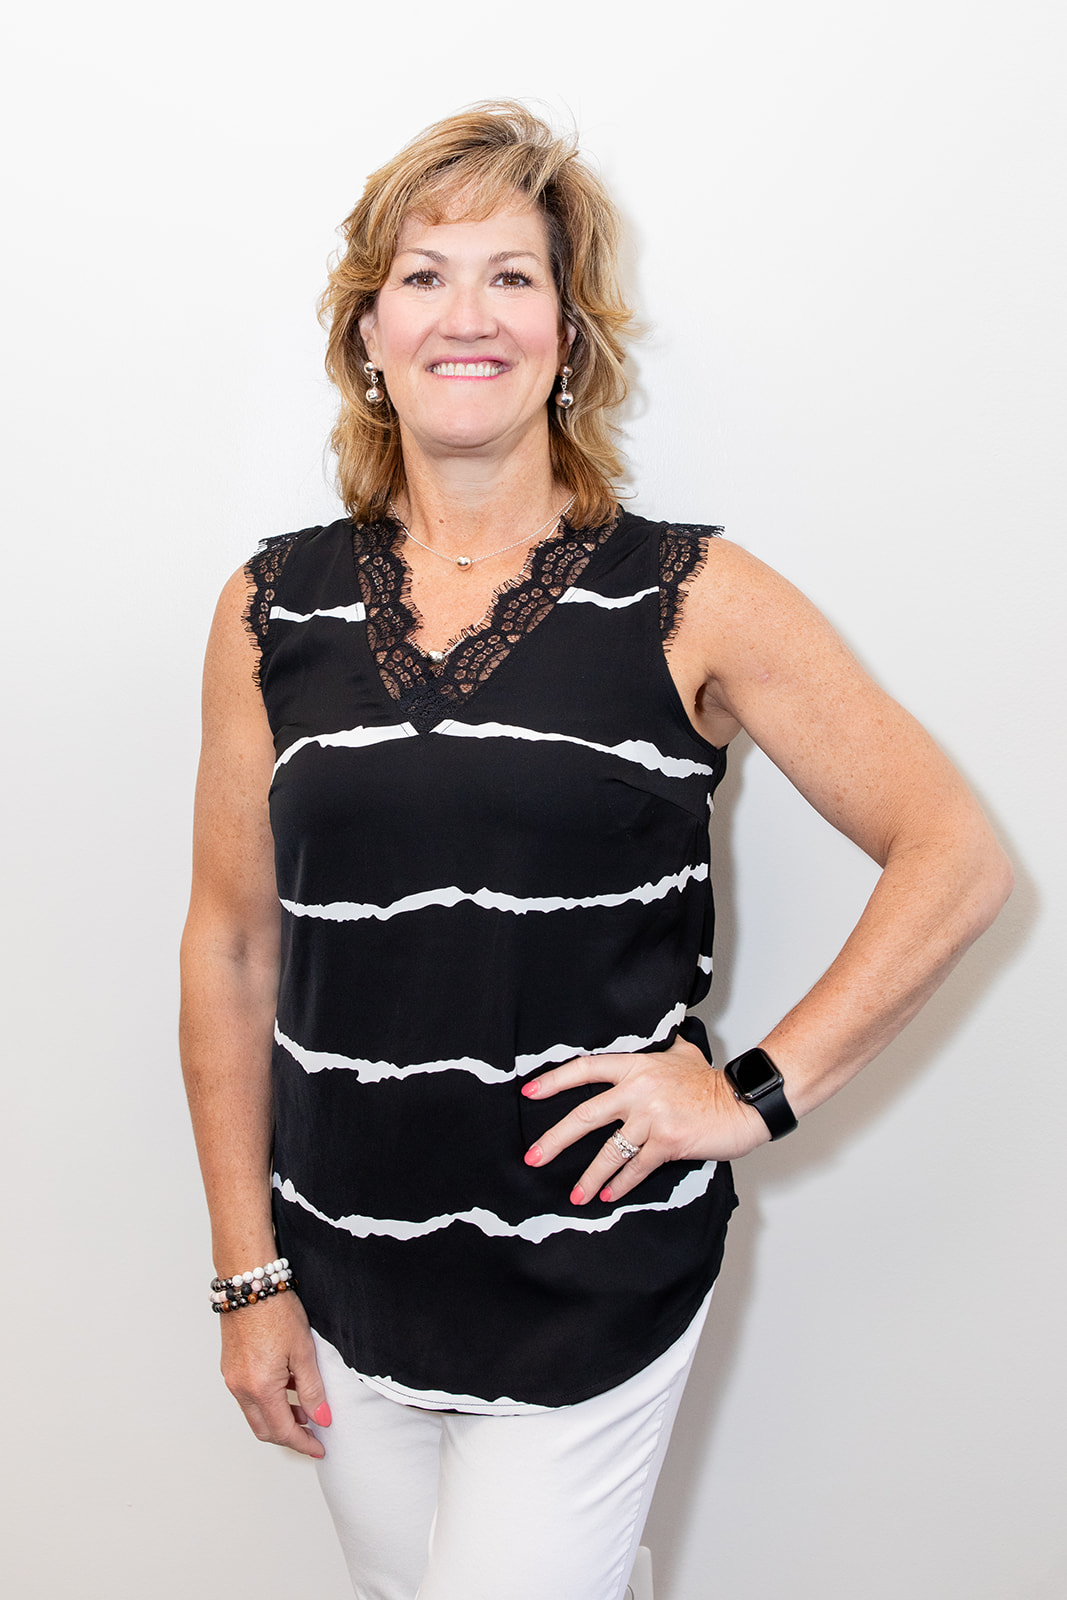 Krista Hillis biography photo, office manager at PRIME Physical Therapy